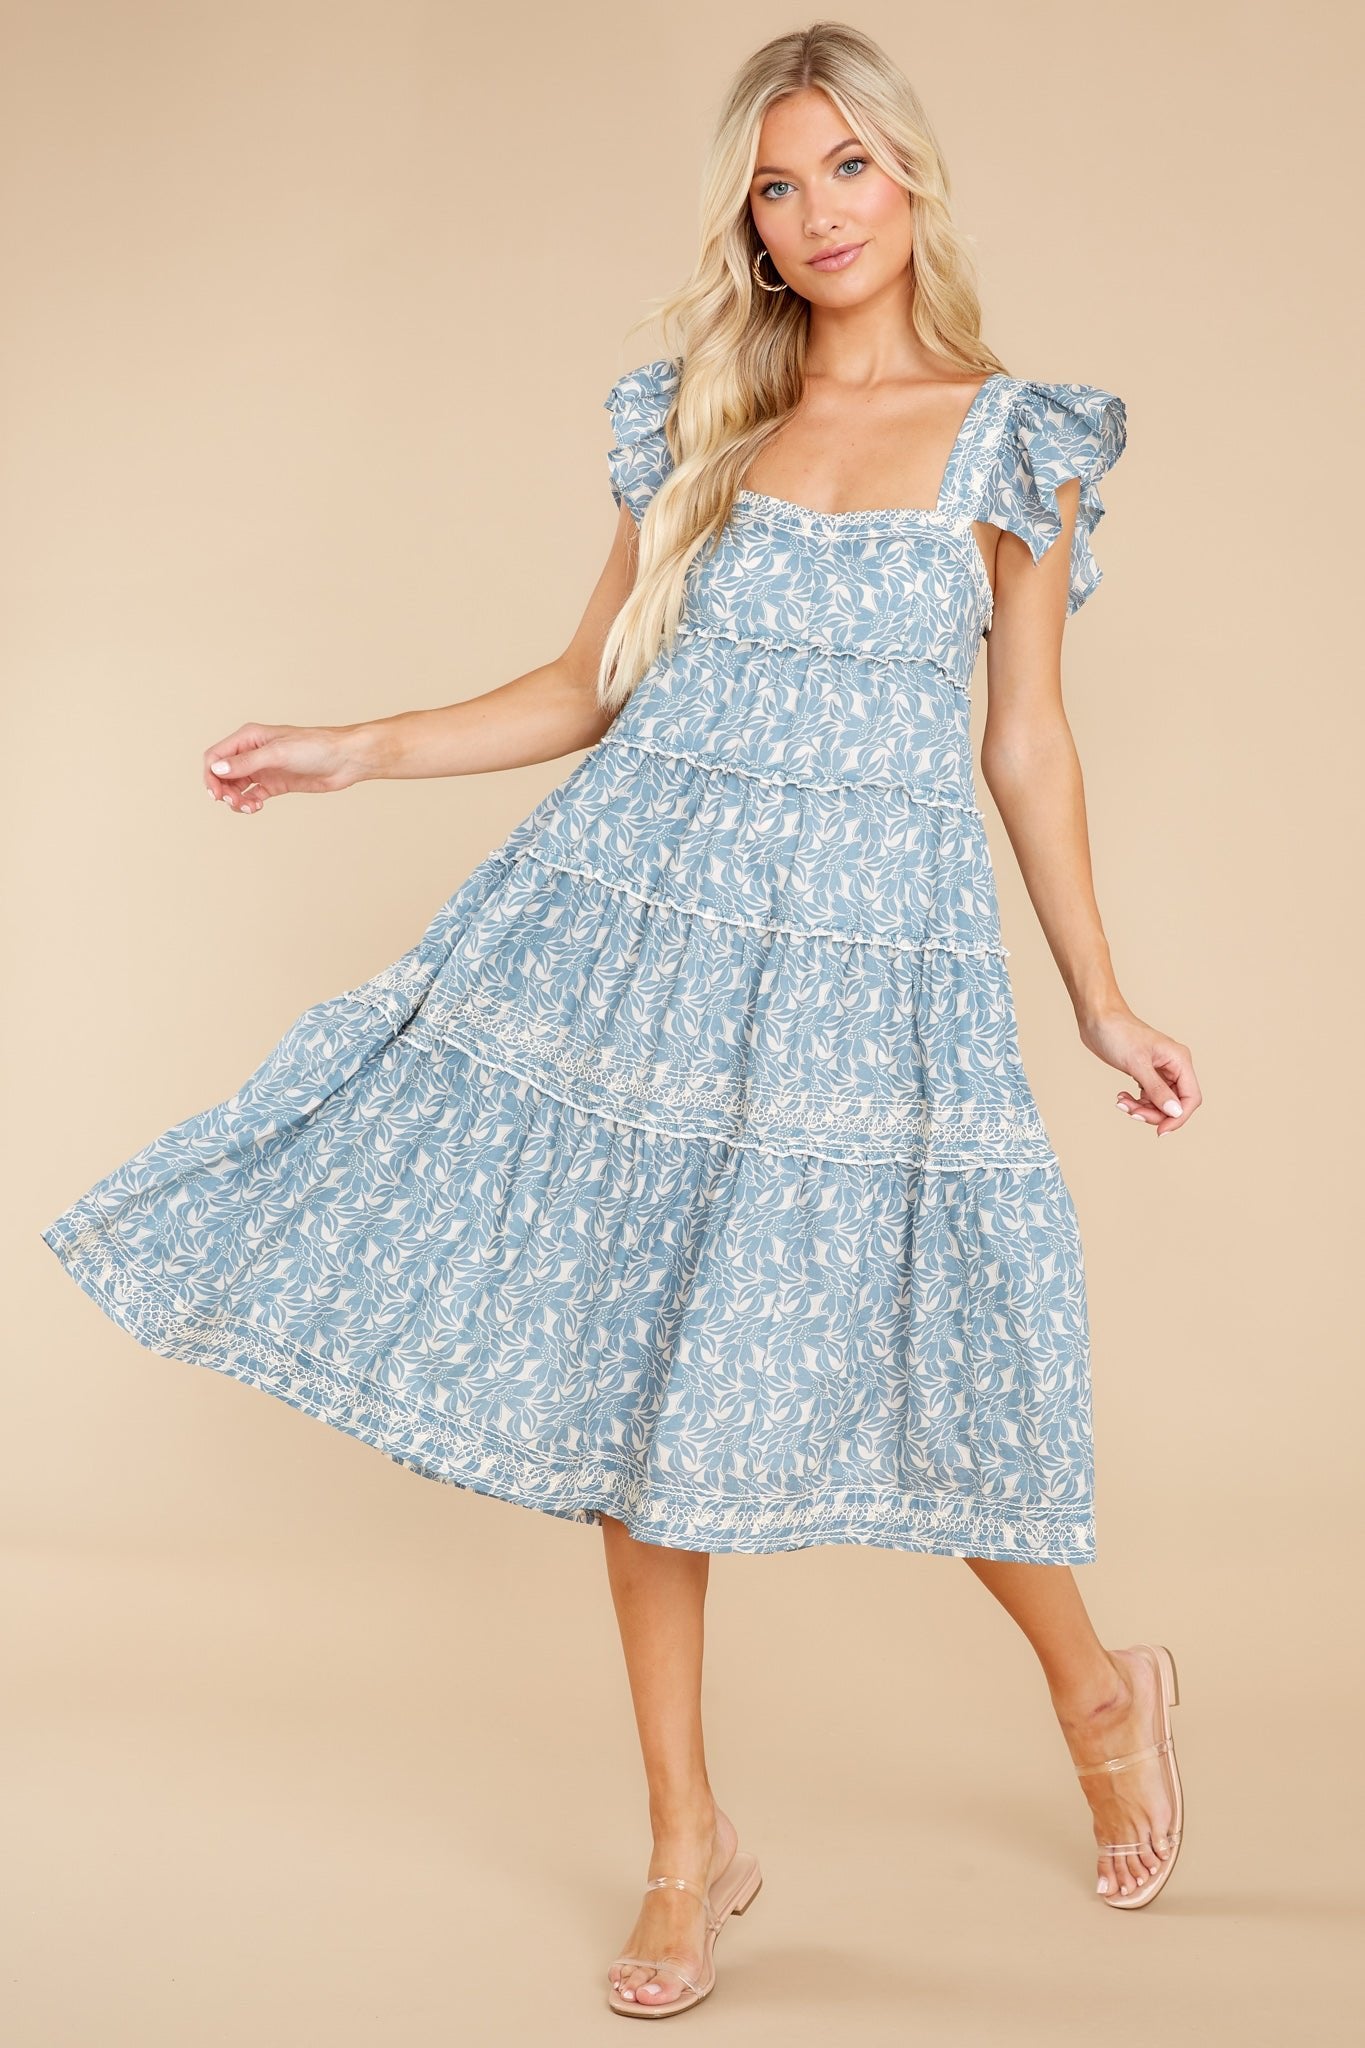 Always Promise Dusty Blue Floral Print Dress - Red Dress